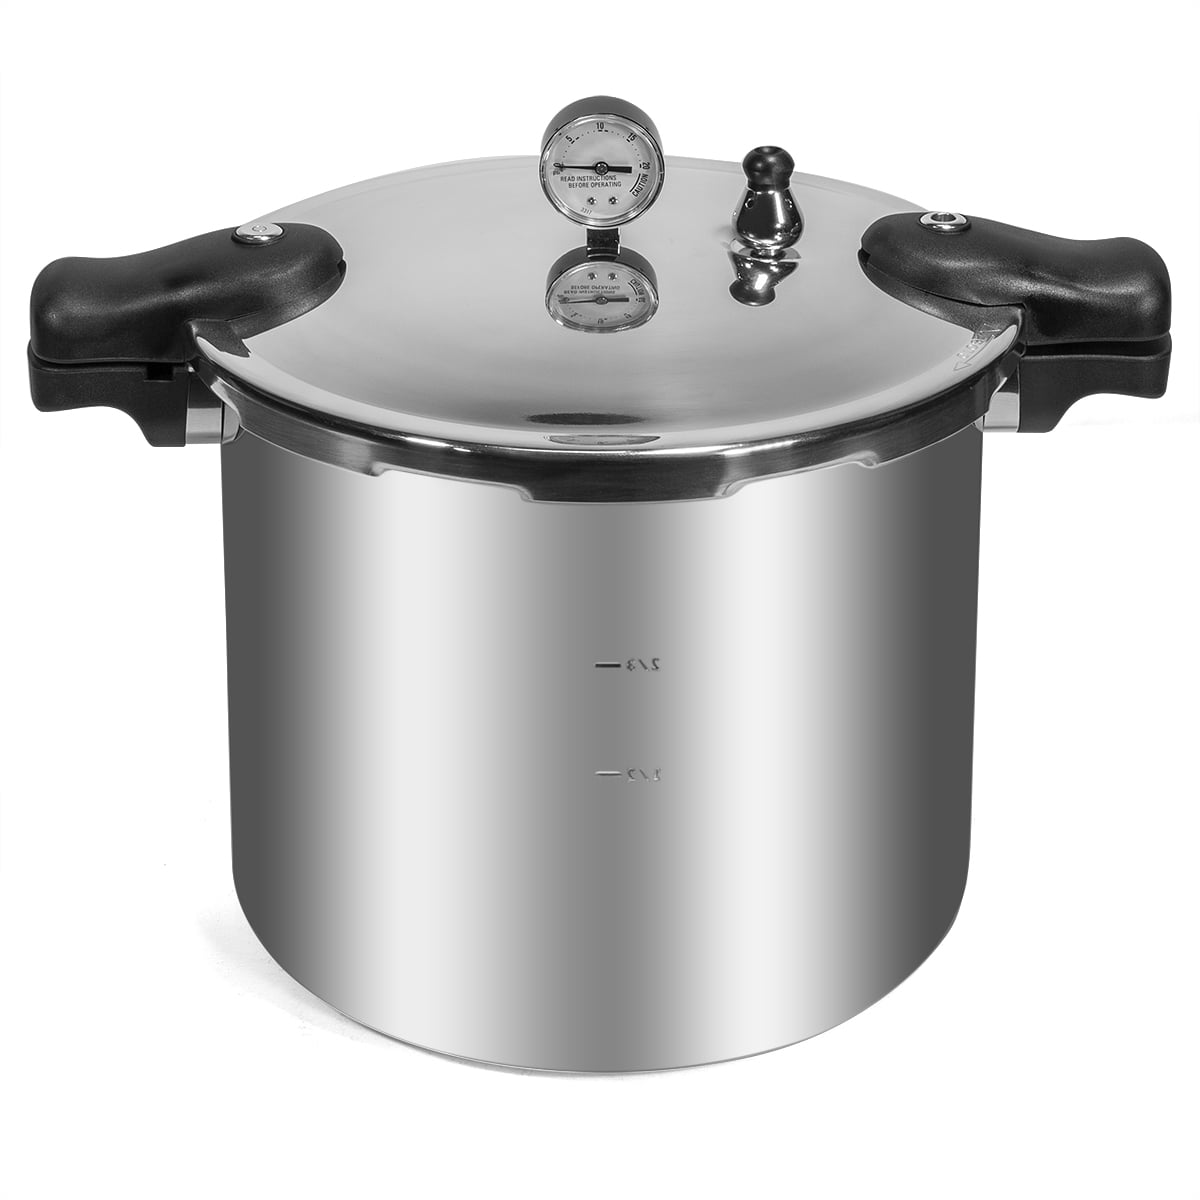 Details about   Pressure Canner Cooker with Canning Rack Presto 23 Quart  01781 brand New 